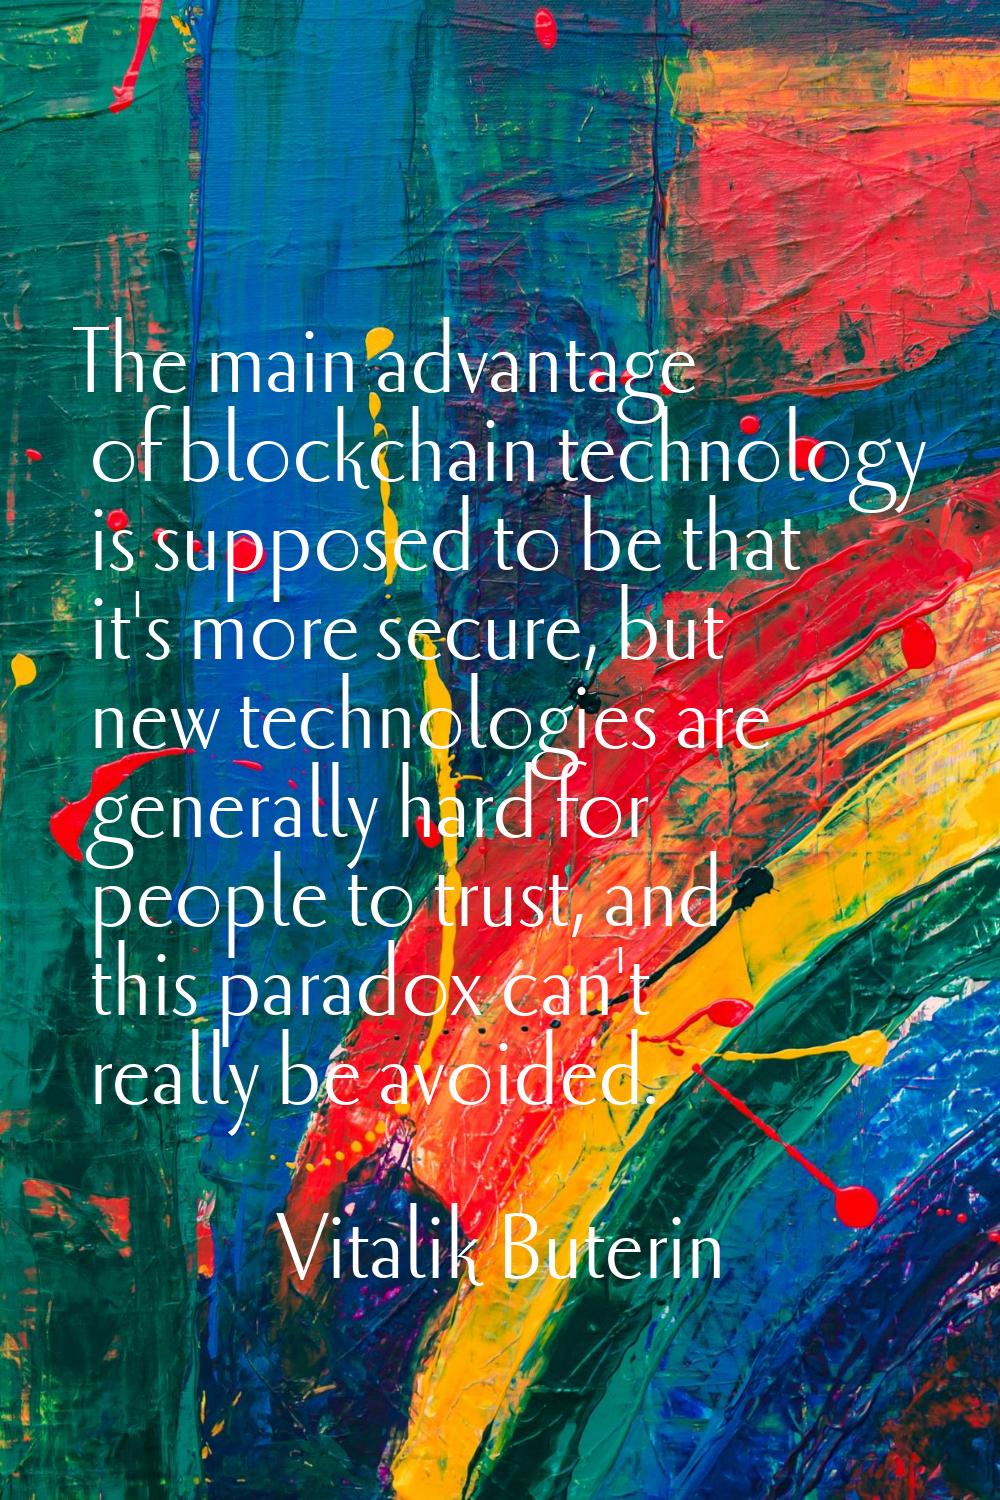 The main advantage of blockchain technology is supposed to be that it's more secure, but new techno